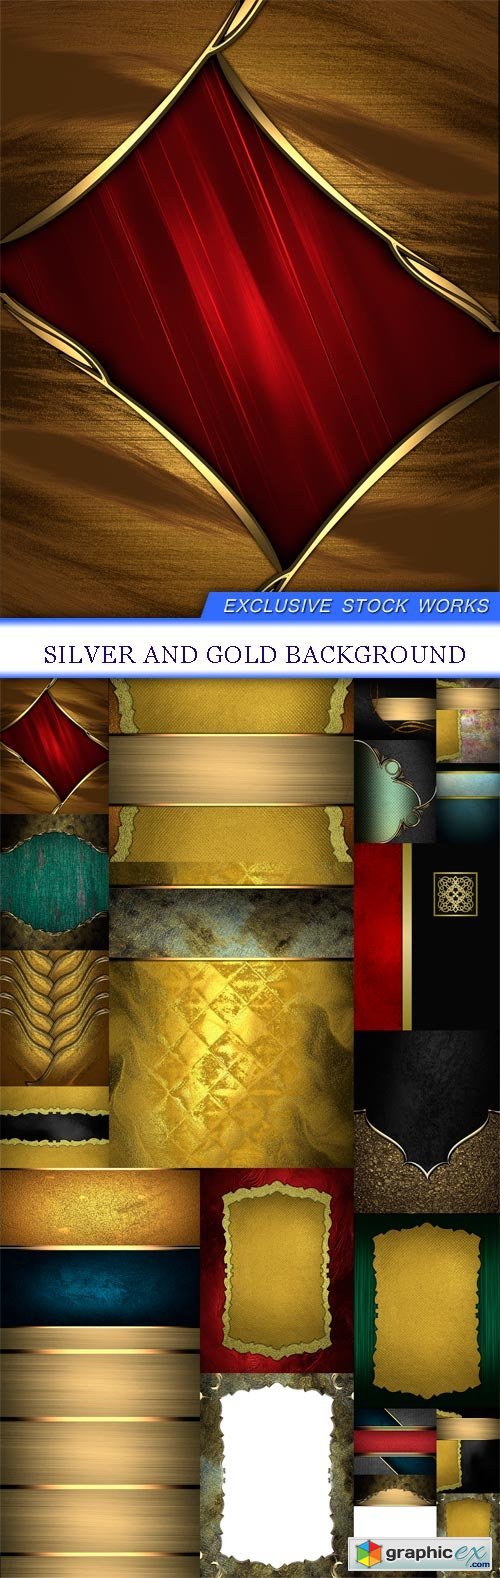 Silver and Gold Background 21X JPEG